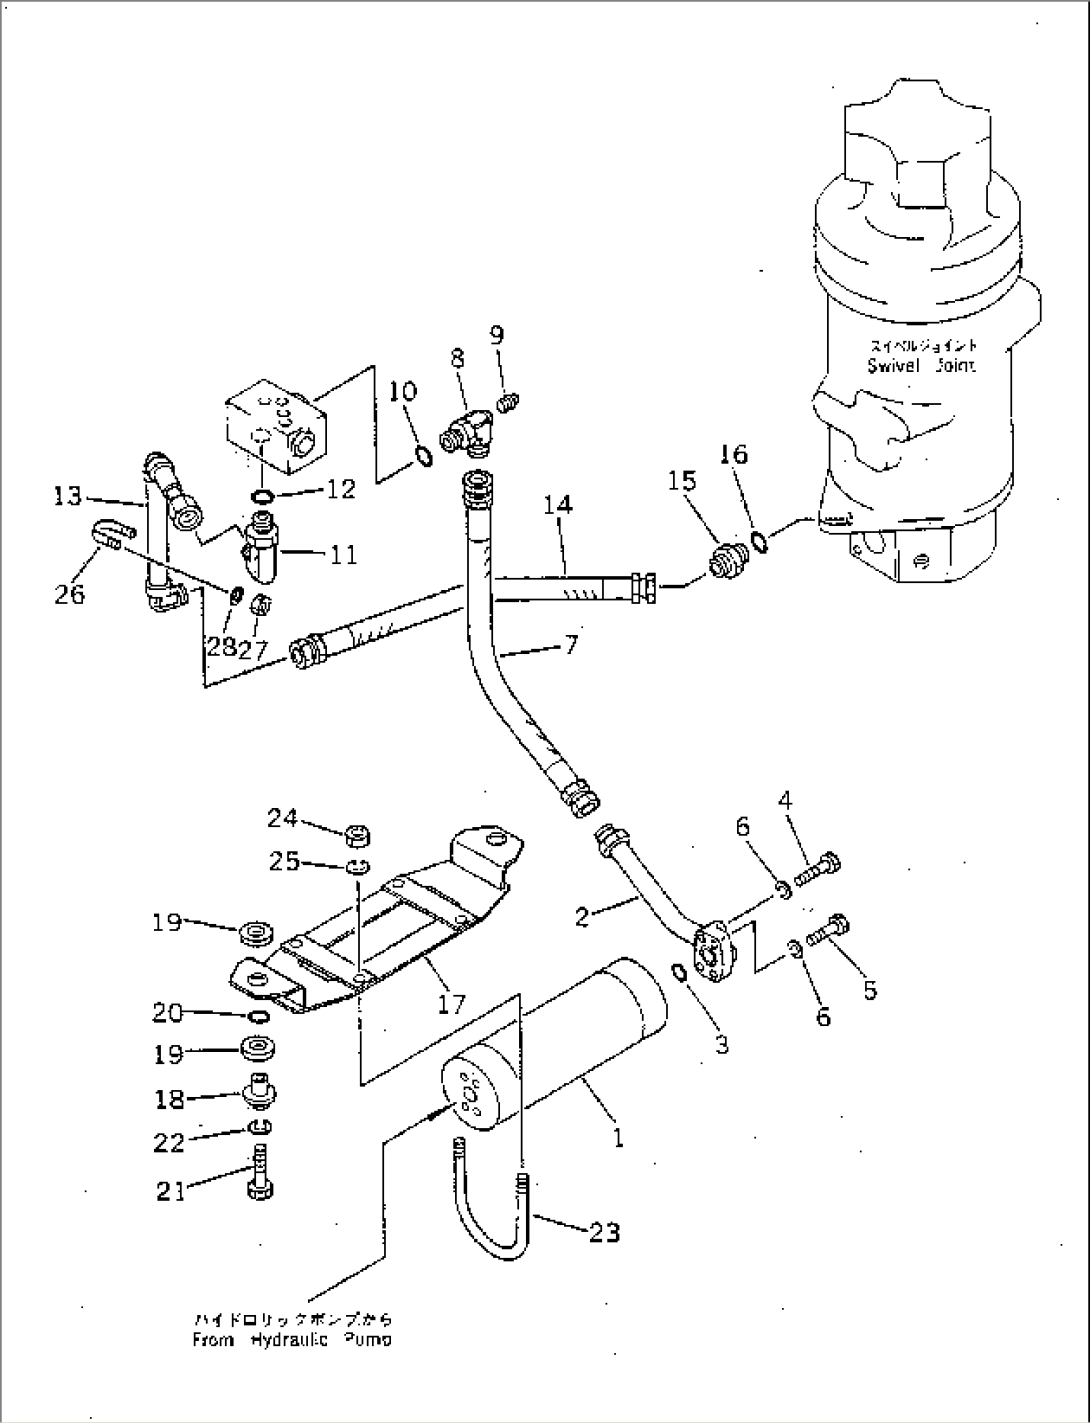 HYDRAULIC PIPING (STEERING AND SWING LINE) (MUFFLER TO SWIVEL JOINT)